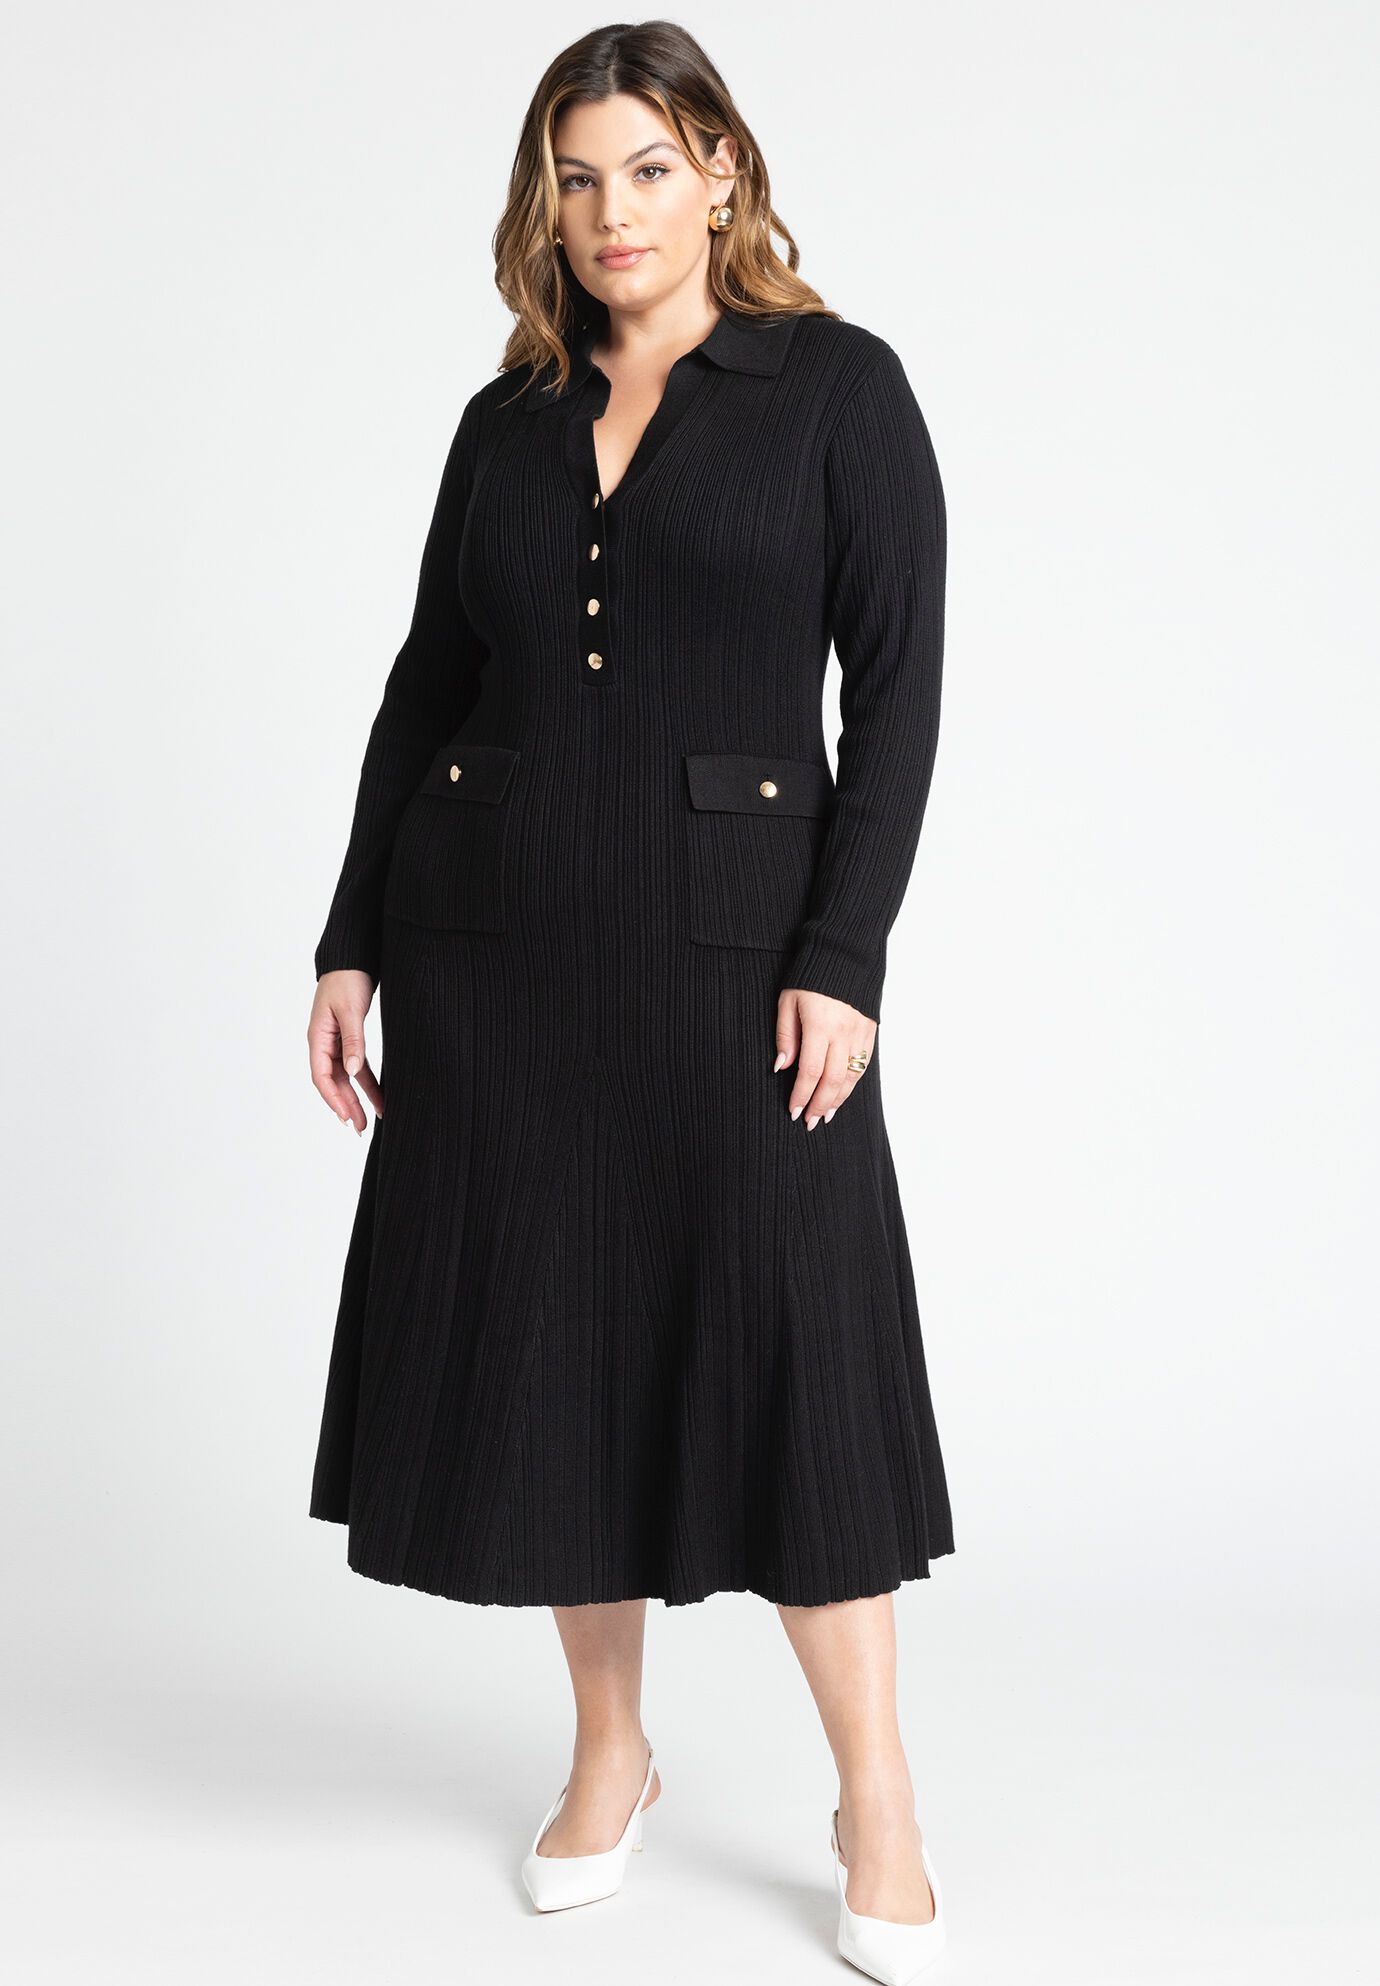 Collared Sweater Pocketed Dress by Eloquii